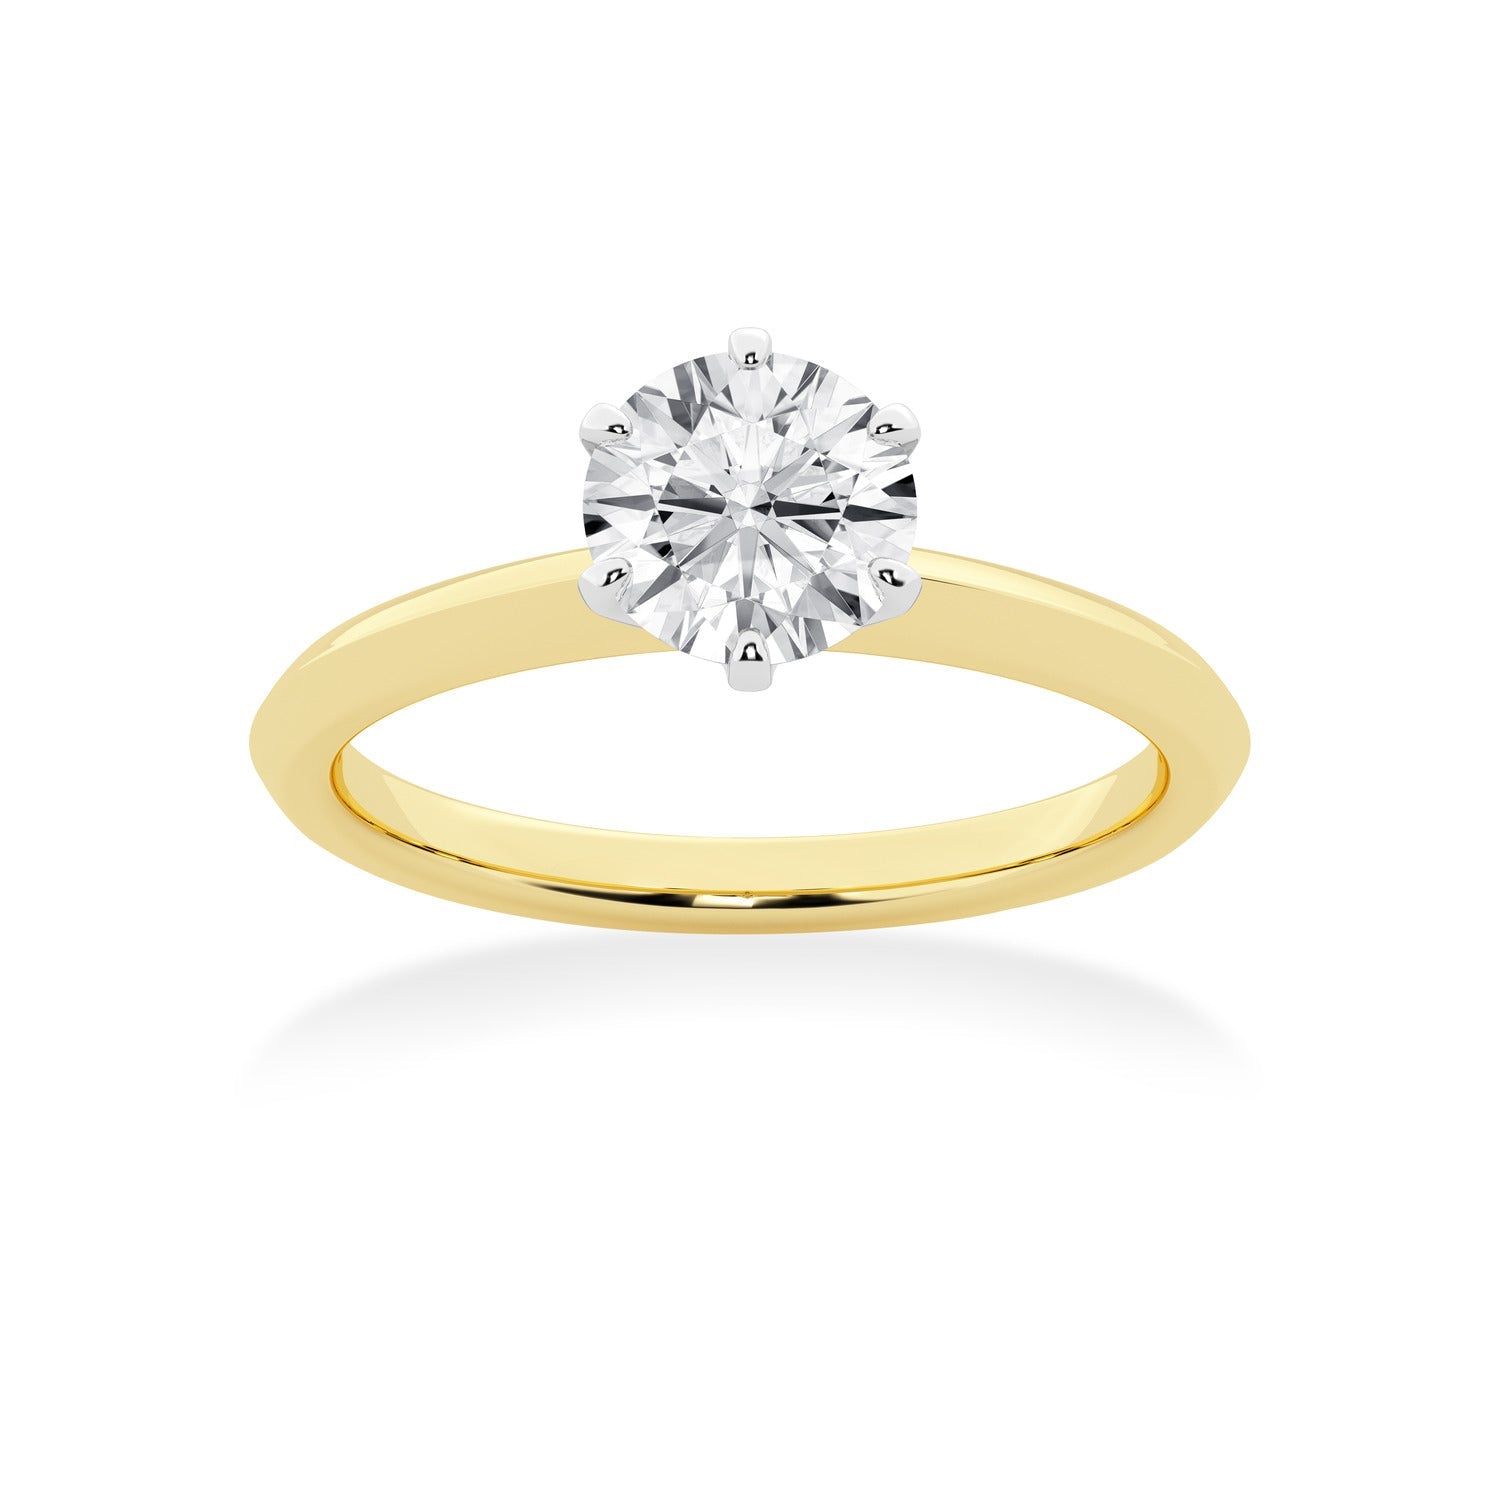 Meera 1.00ct Round Solitaire Laboratory Grown Diamond Ring in 18ct Yellow Gold Rings Bevilles 